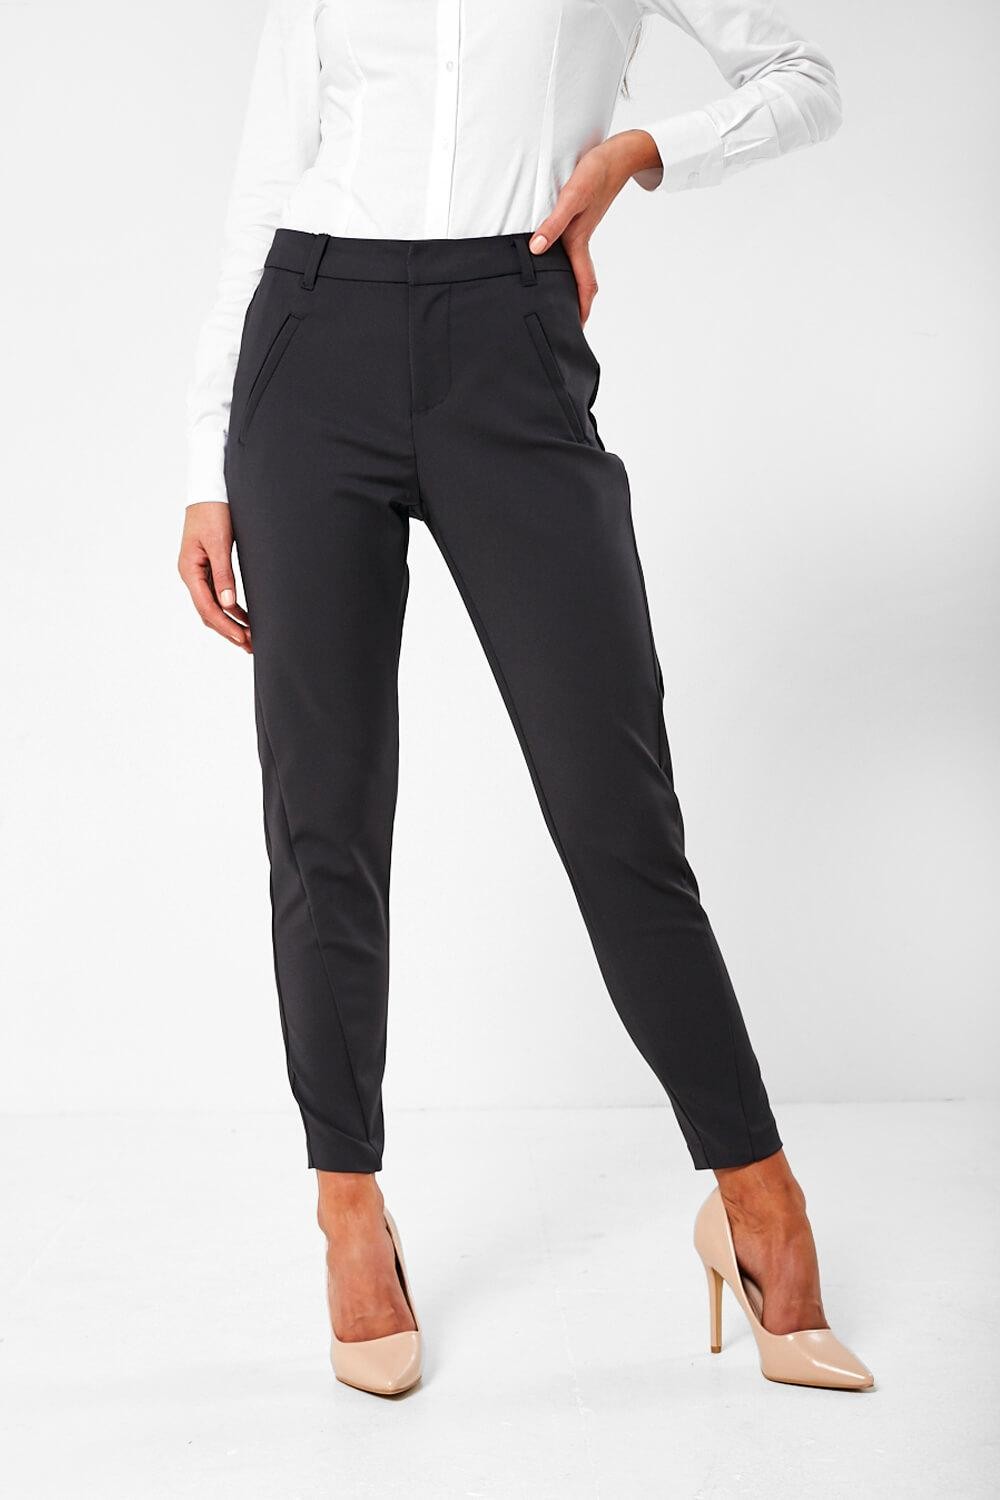 Vero Moda Victoria Ankle Pants in Charcoal | iCLOTHING